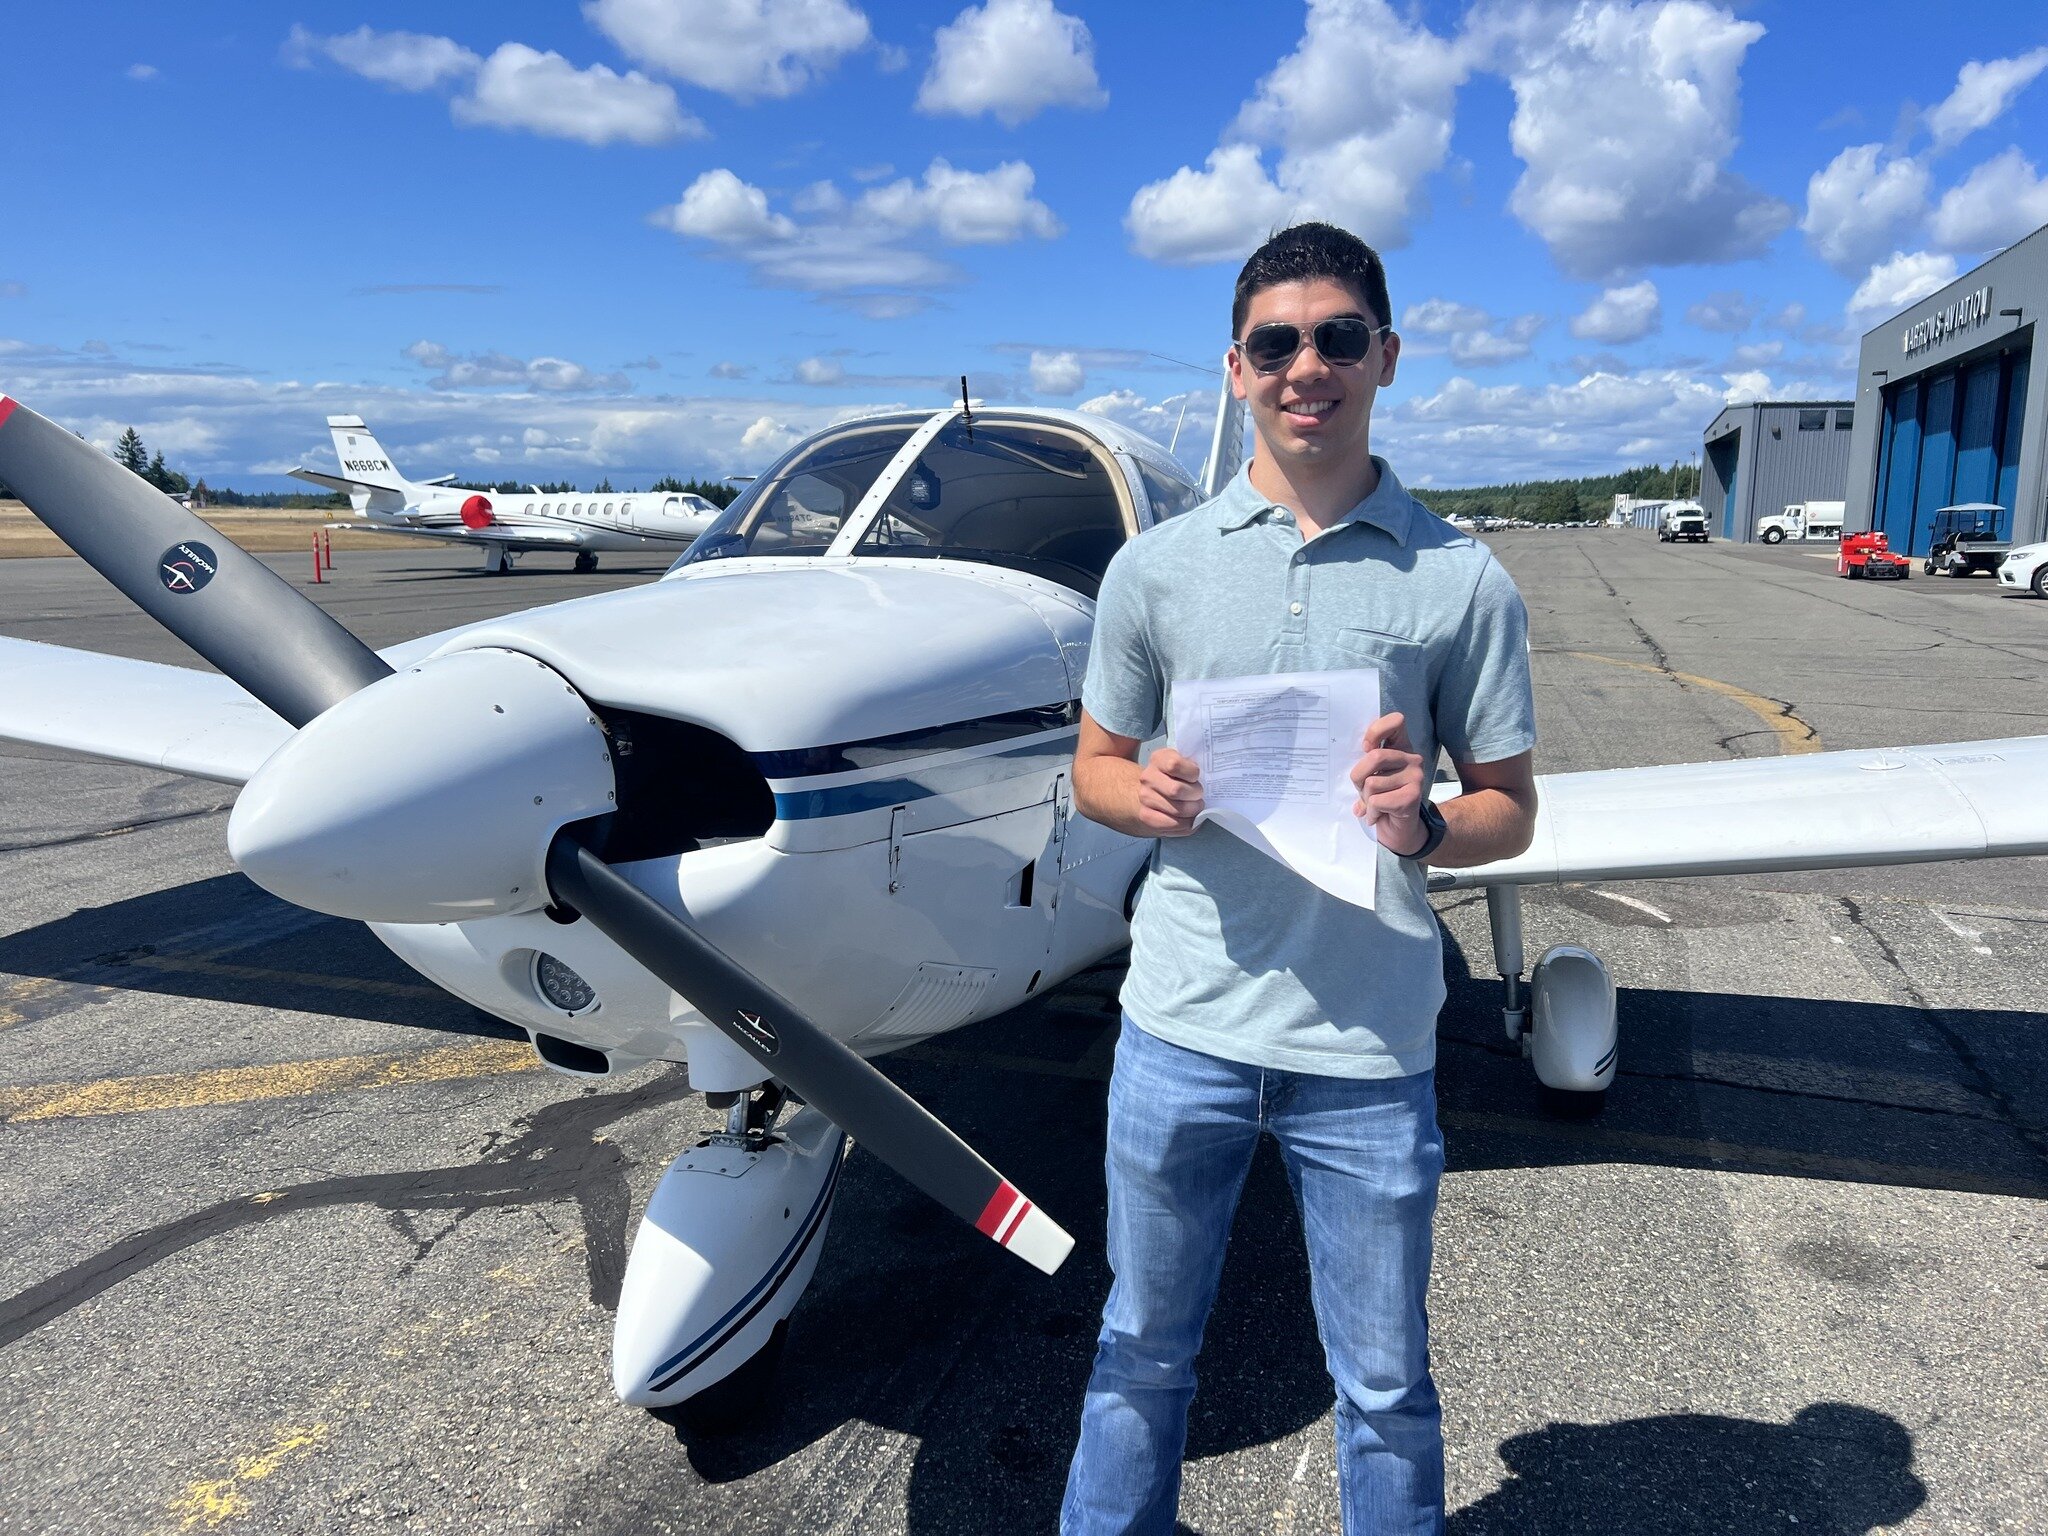 Congratulations to Hunter! Hunter just earned his Private Pilot License with us. Inquire on our website for the fastest way to earn your PPL! 
Www.Mach-six.us
-
-
-
-
-
-#aviation #plane #planespotting #planes#aviations #plane
#planespotting #planes#